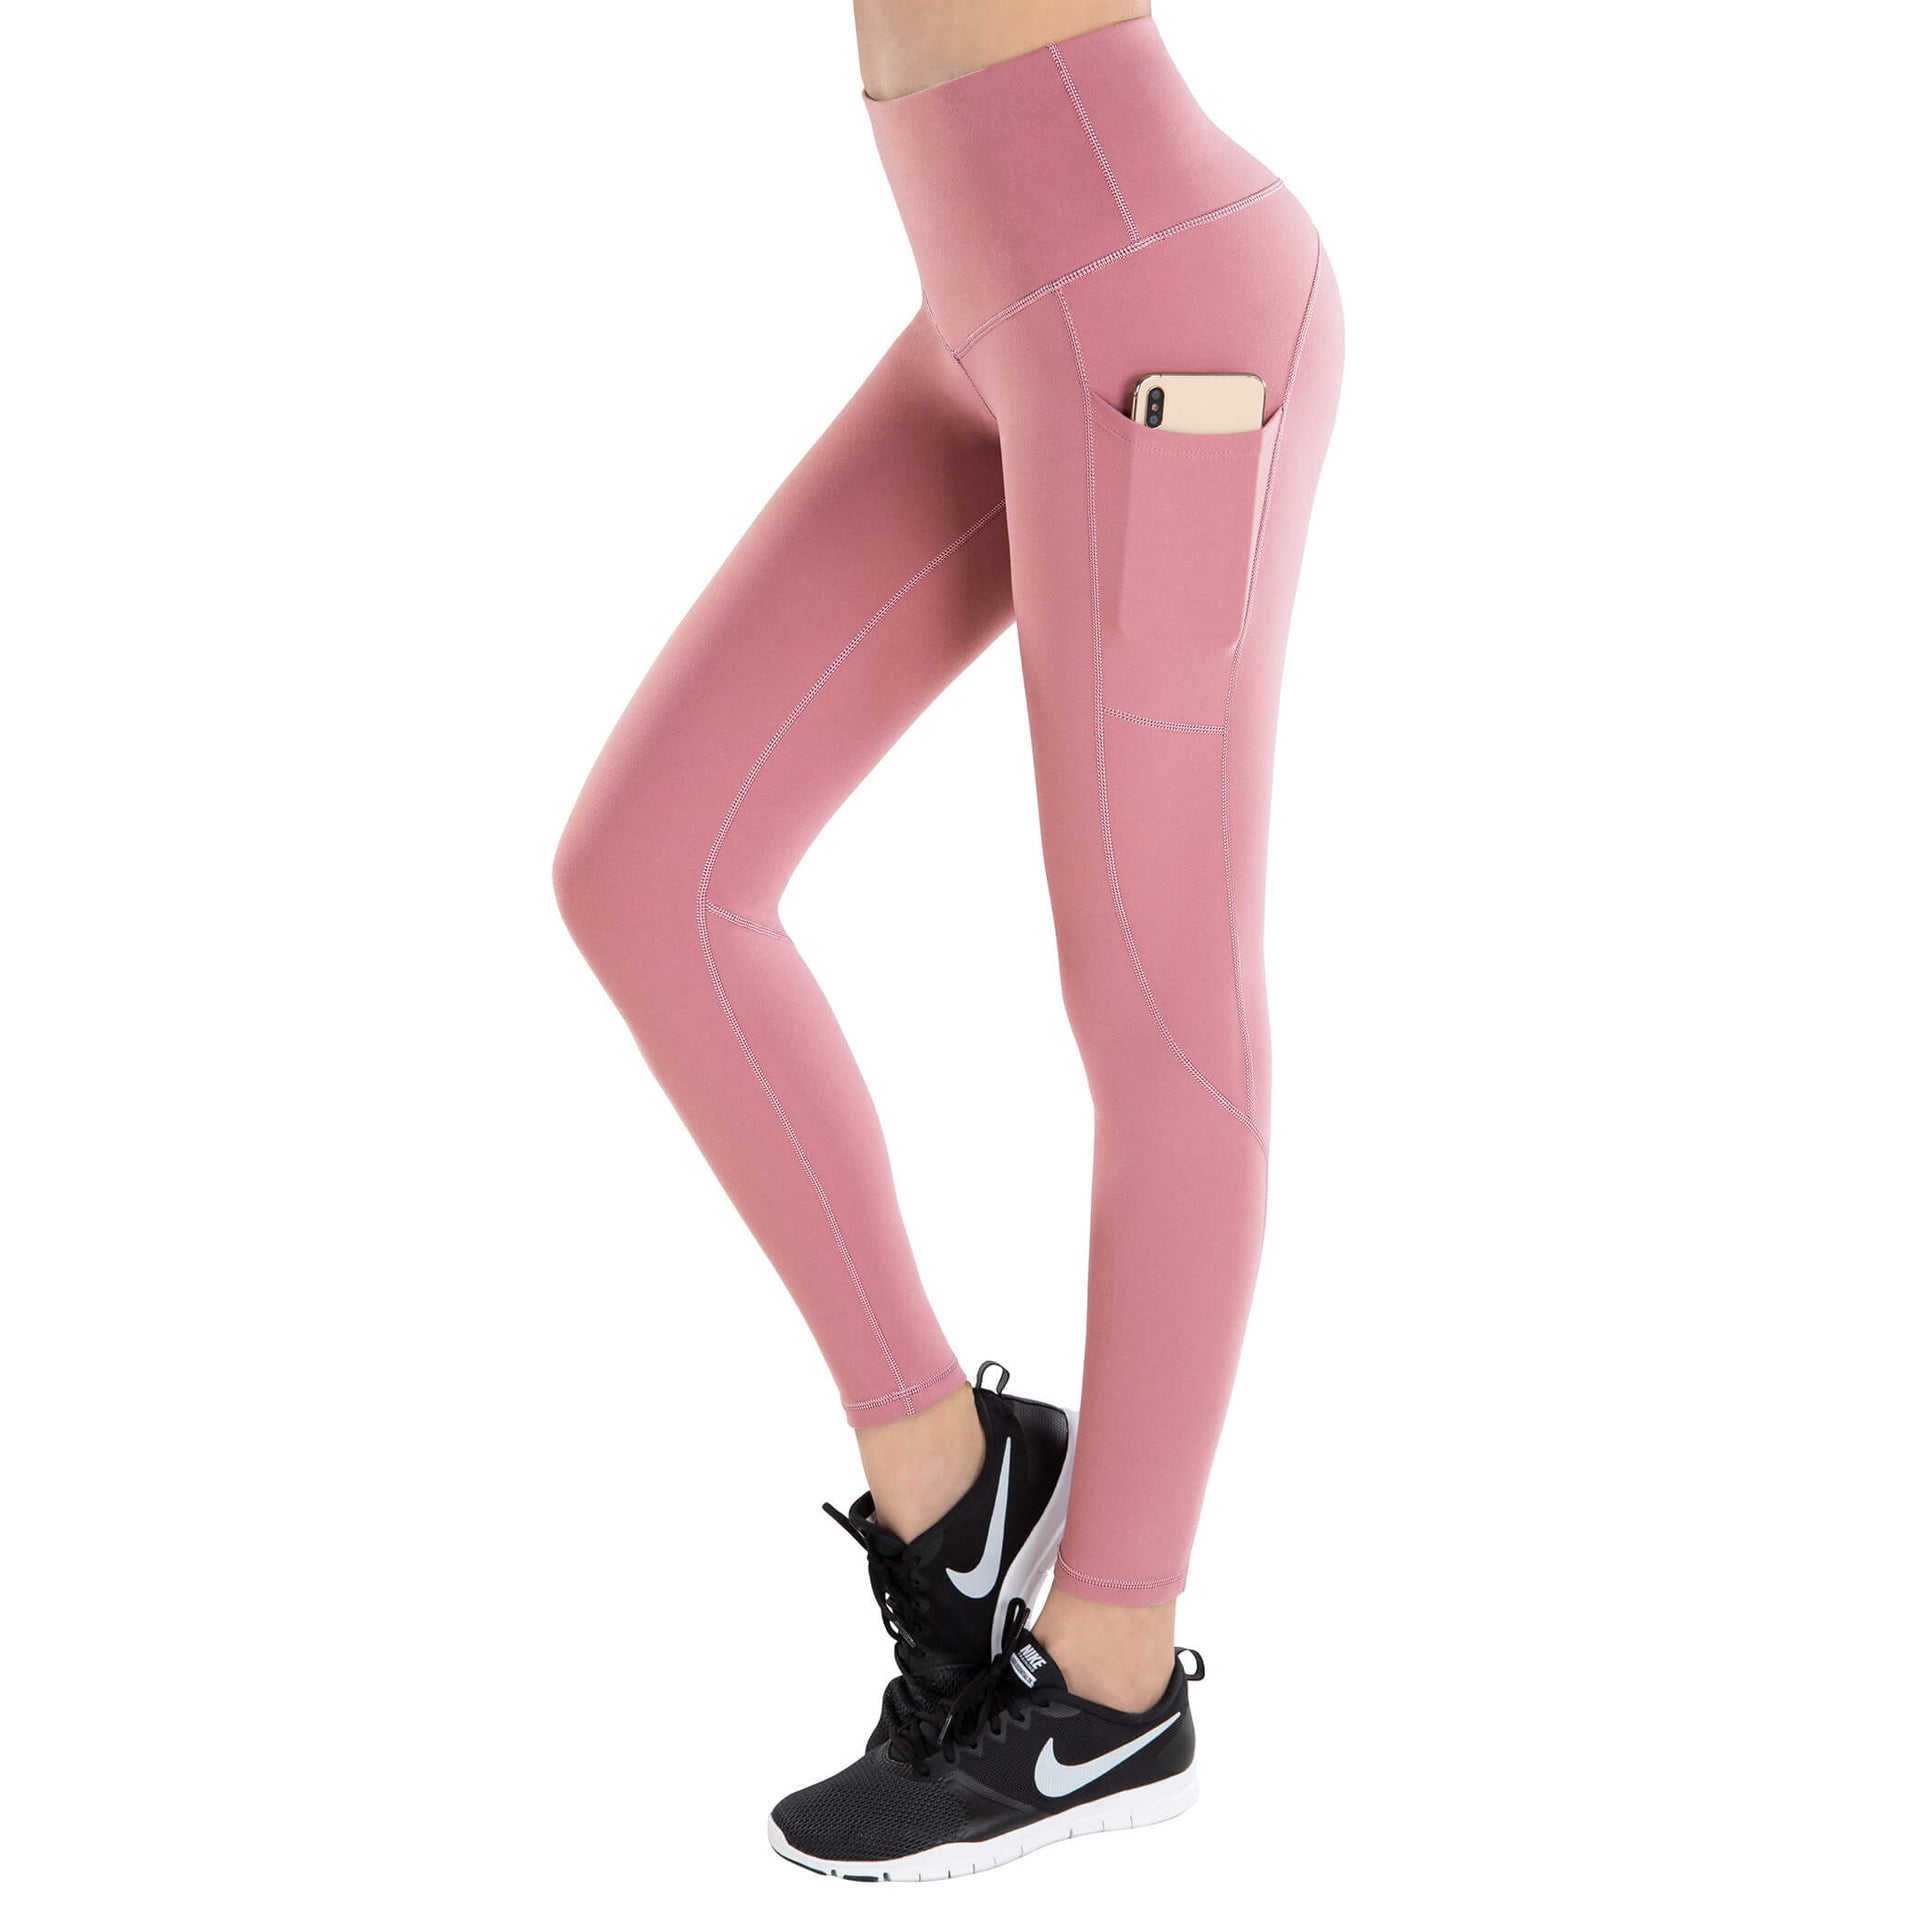 IUGA High Waisted Yoga Pants for Women with Pockets Palestine